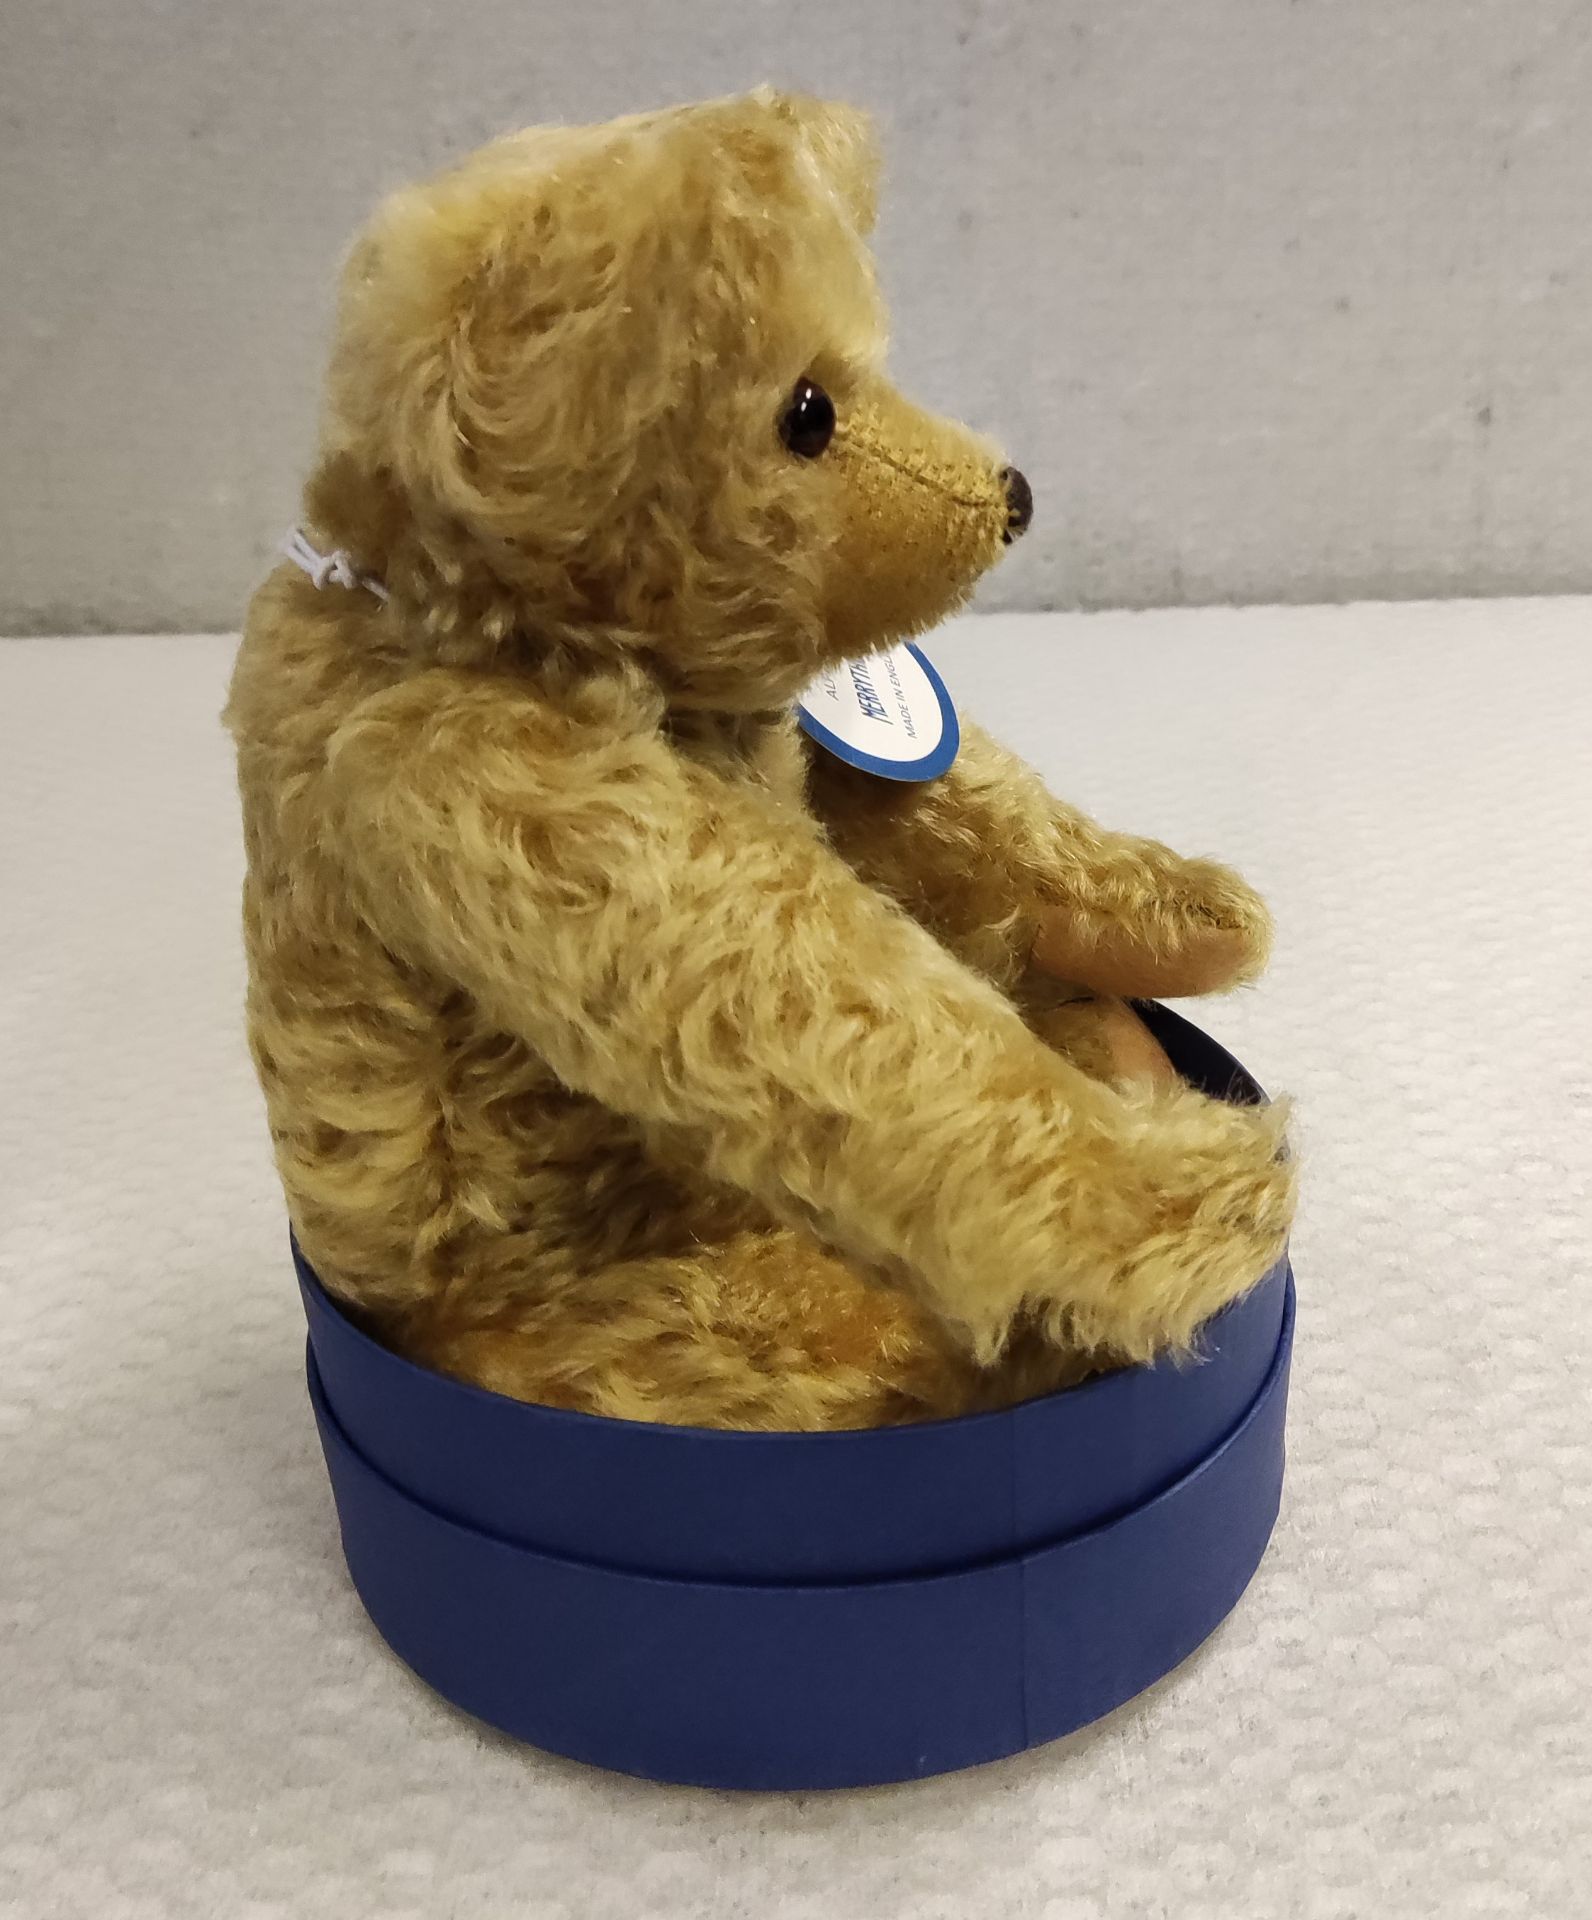 1 x Farnell's Alpha Toys/Merrythought Christopher Robin's Little Edward Teddy Bear - New/Boxed - Image 8 of 12